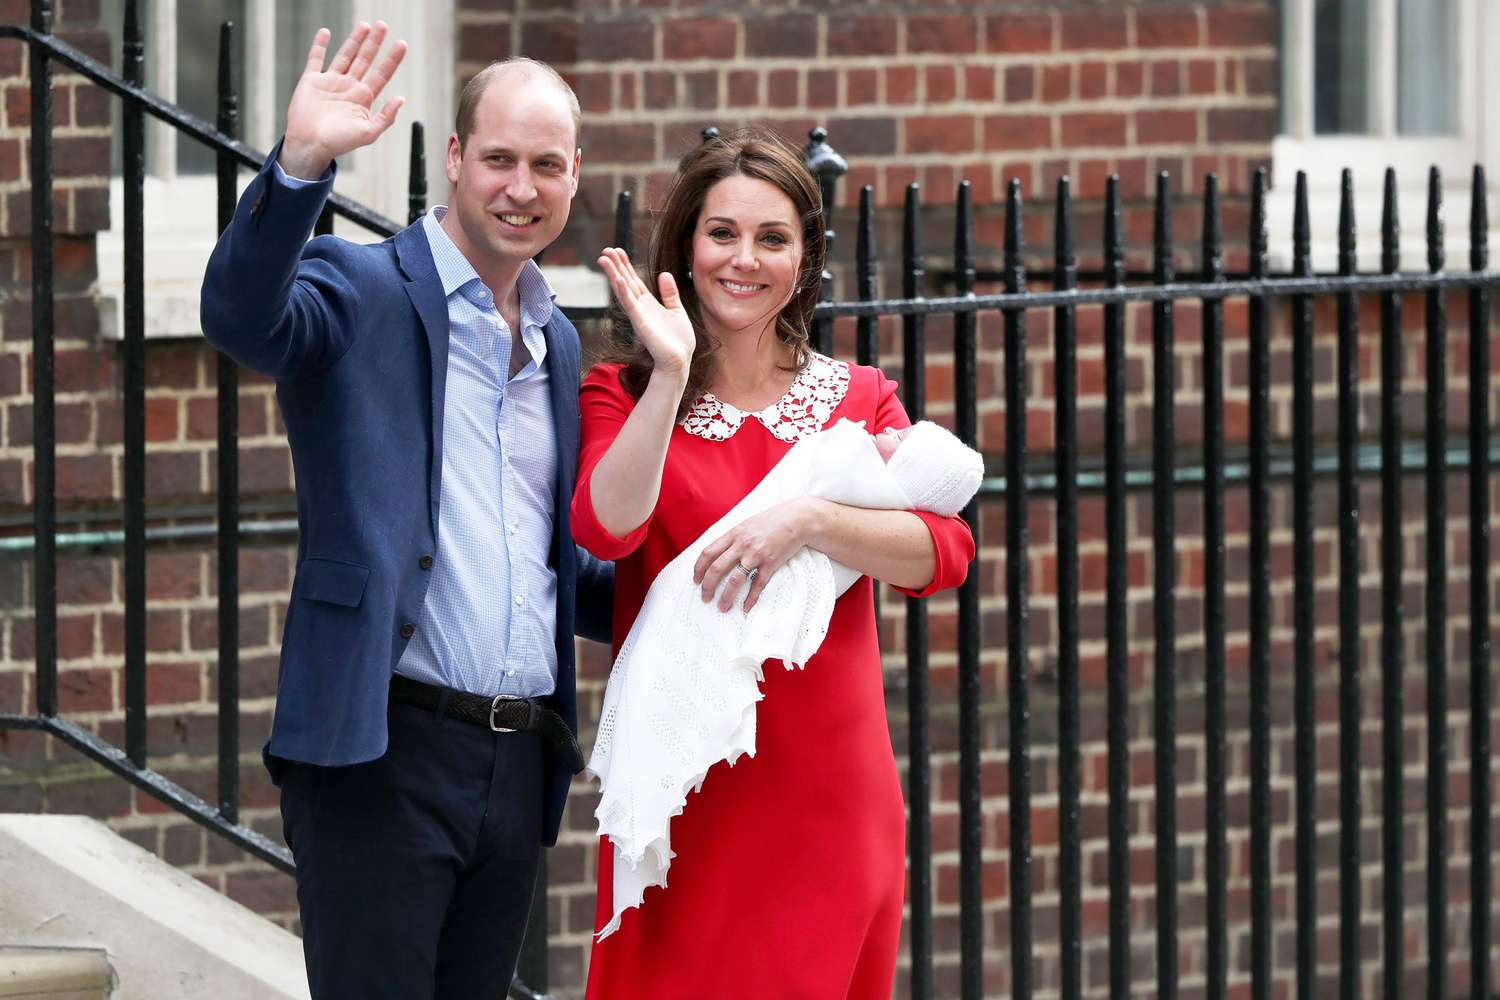 Why Does Kate Middleton Leave the Hospital So Soon After